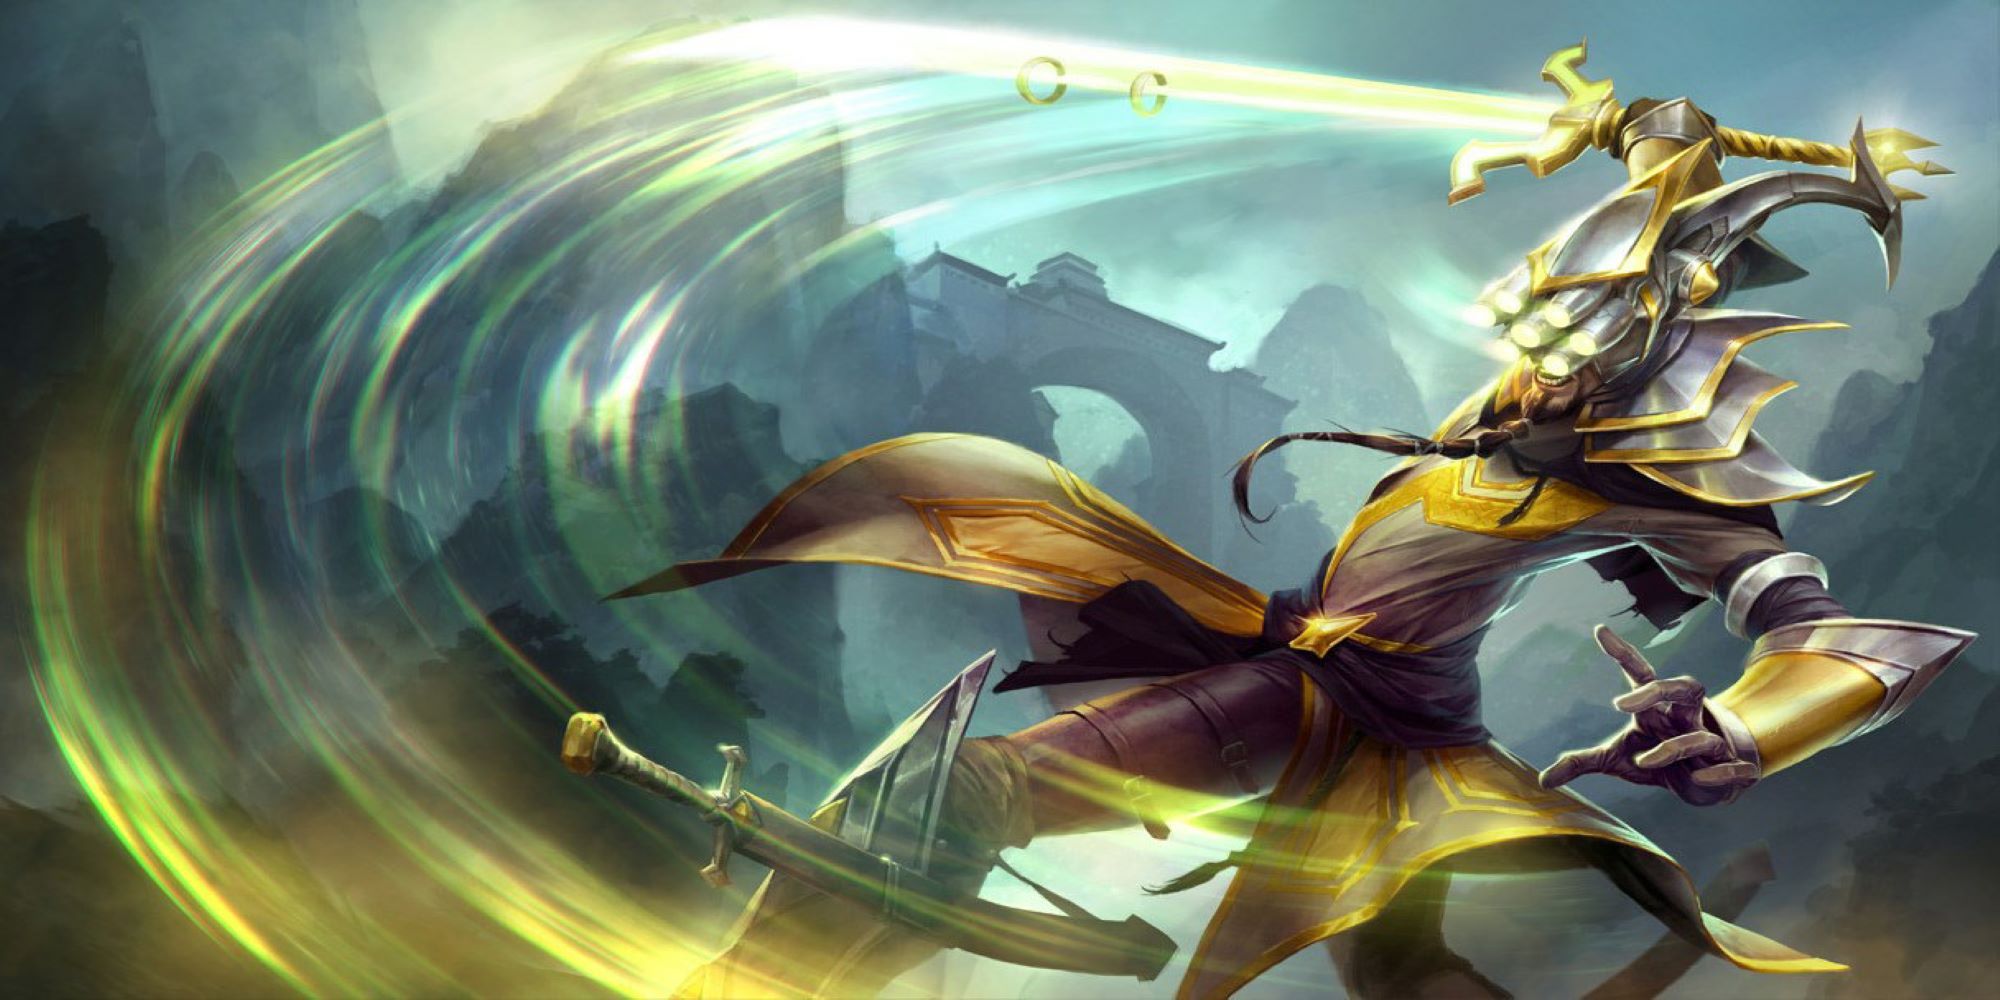 Master Yi from League of Legends